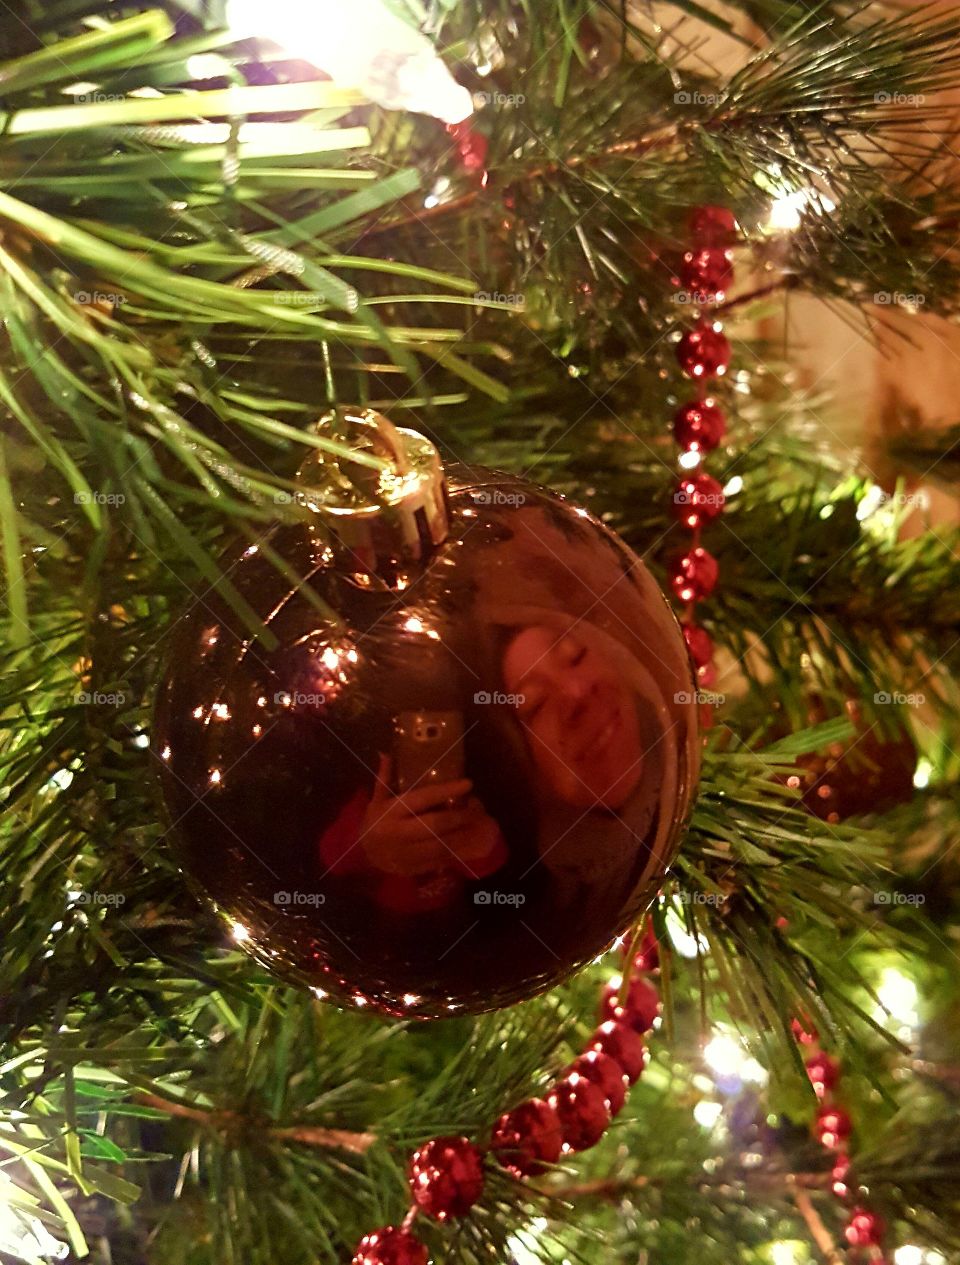 Too funny! It's a Christmas ornament portrait with my sister.